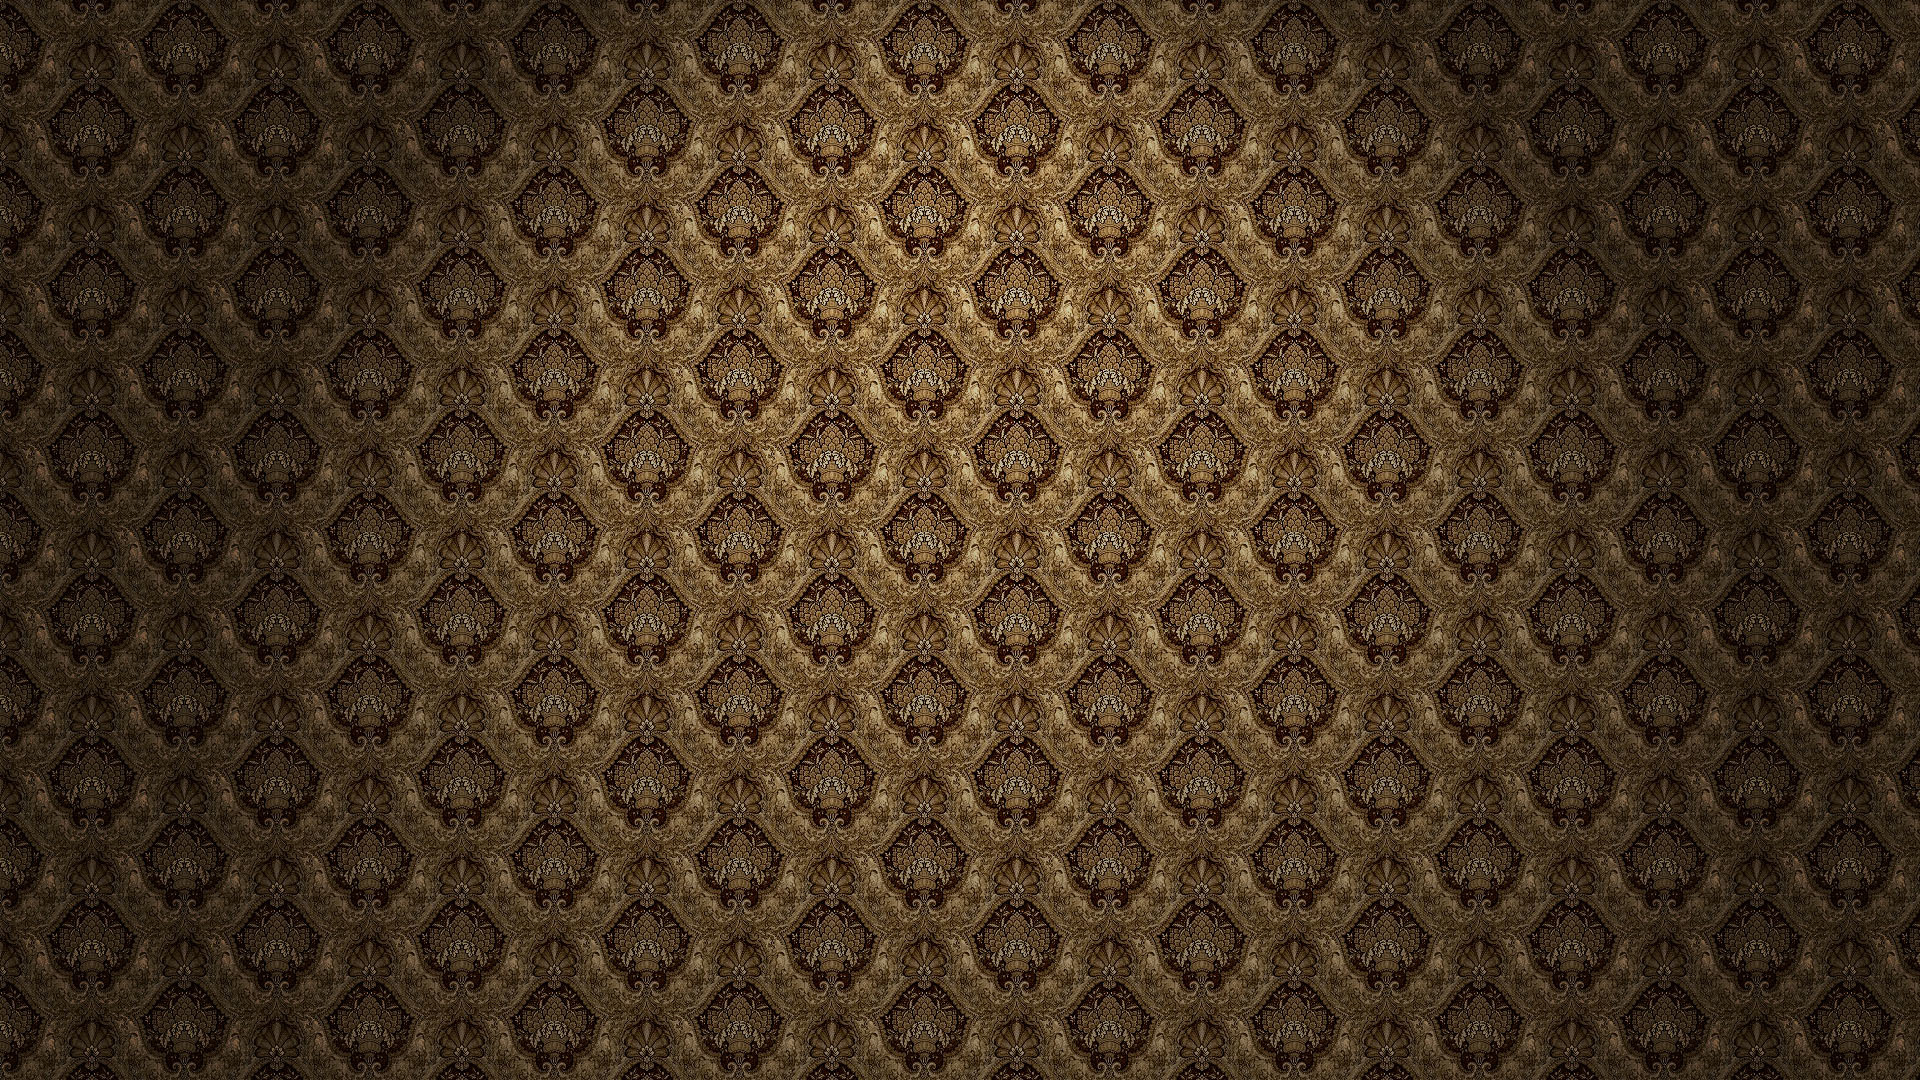  is a Gold and Black Pattern wallpaper This Gold and Black Pattern